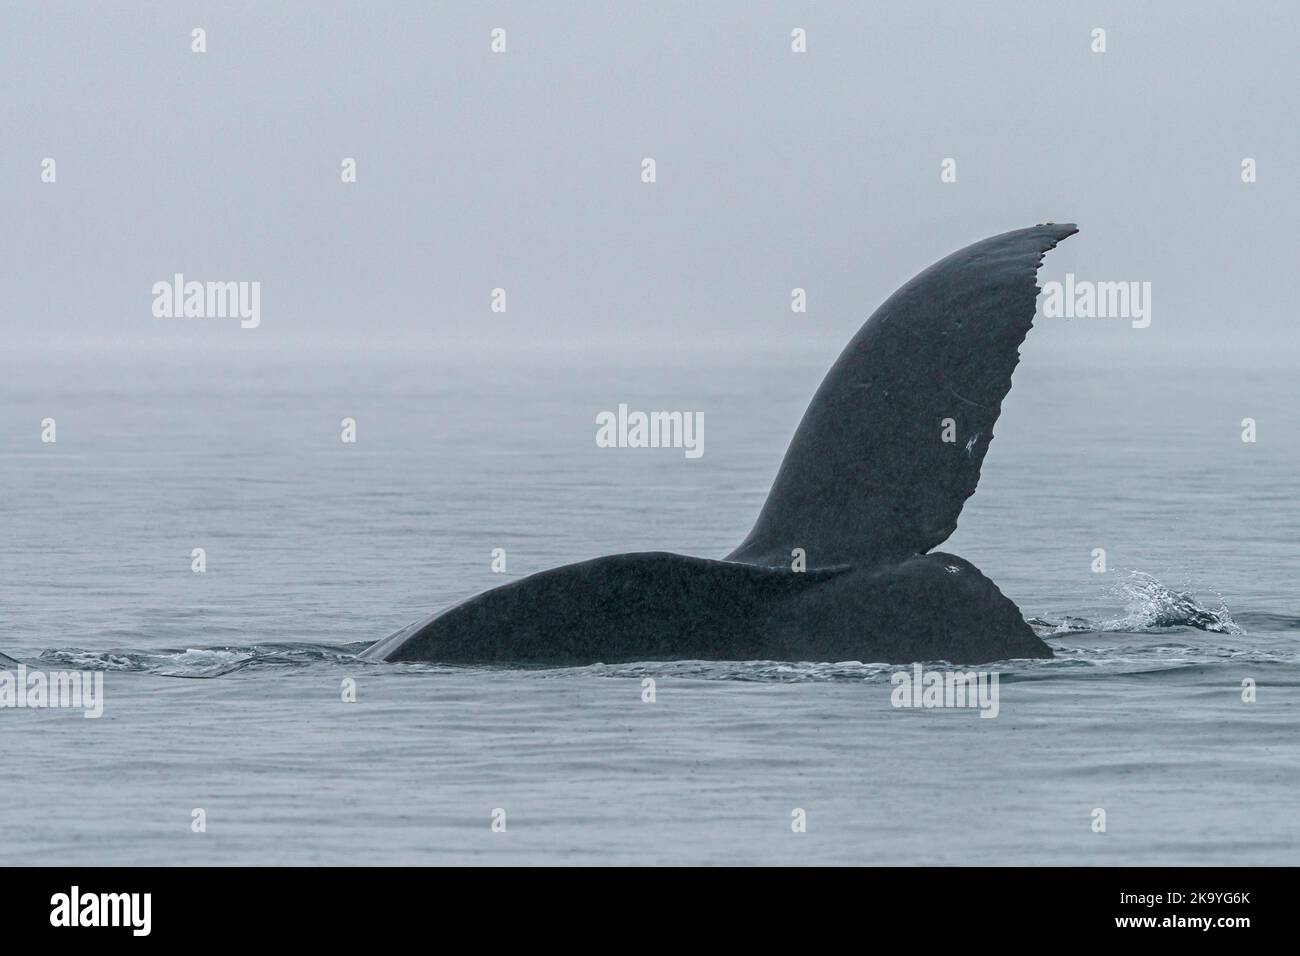 Humpback whale (Megaptera novaeangliae) playing and showing its fluke in Blackfish Sound, Queen Charlotte Strait, First Nations Territory, off norther Stock Photo